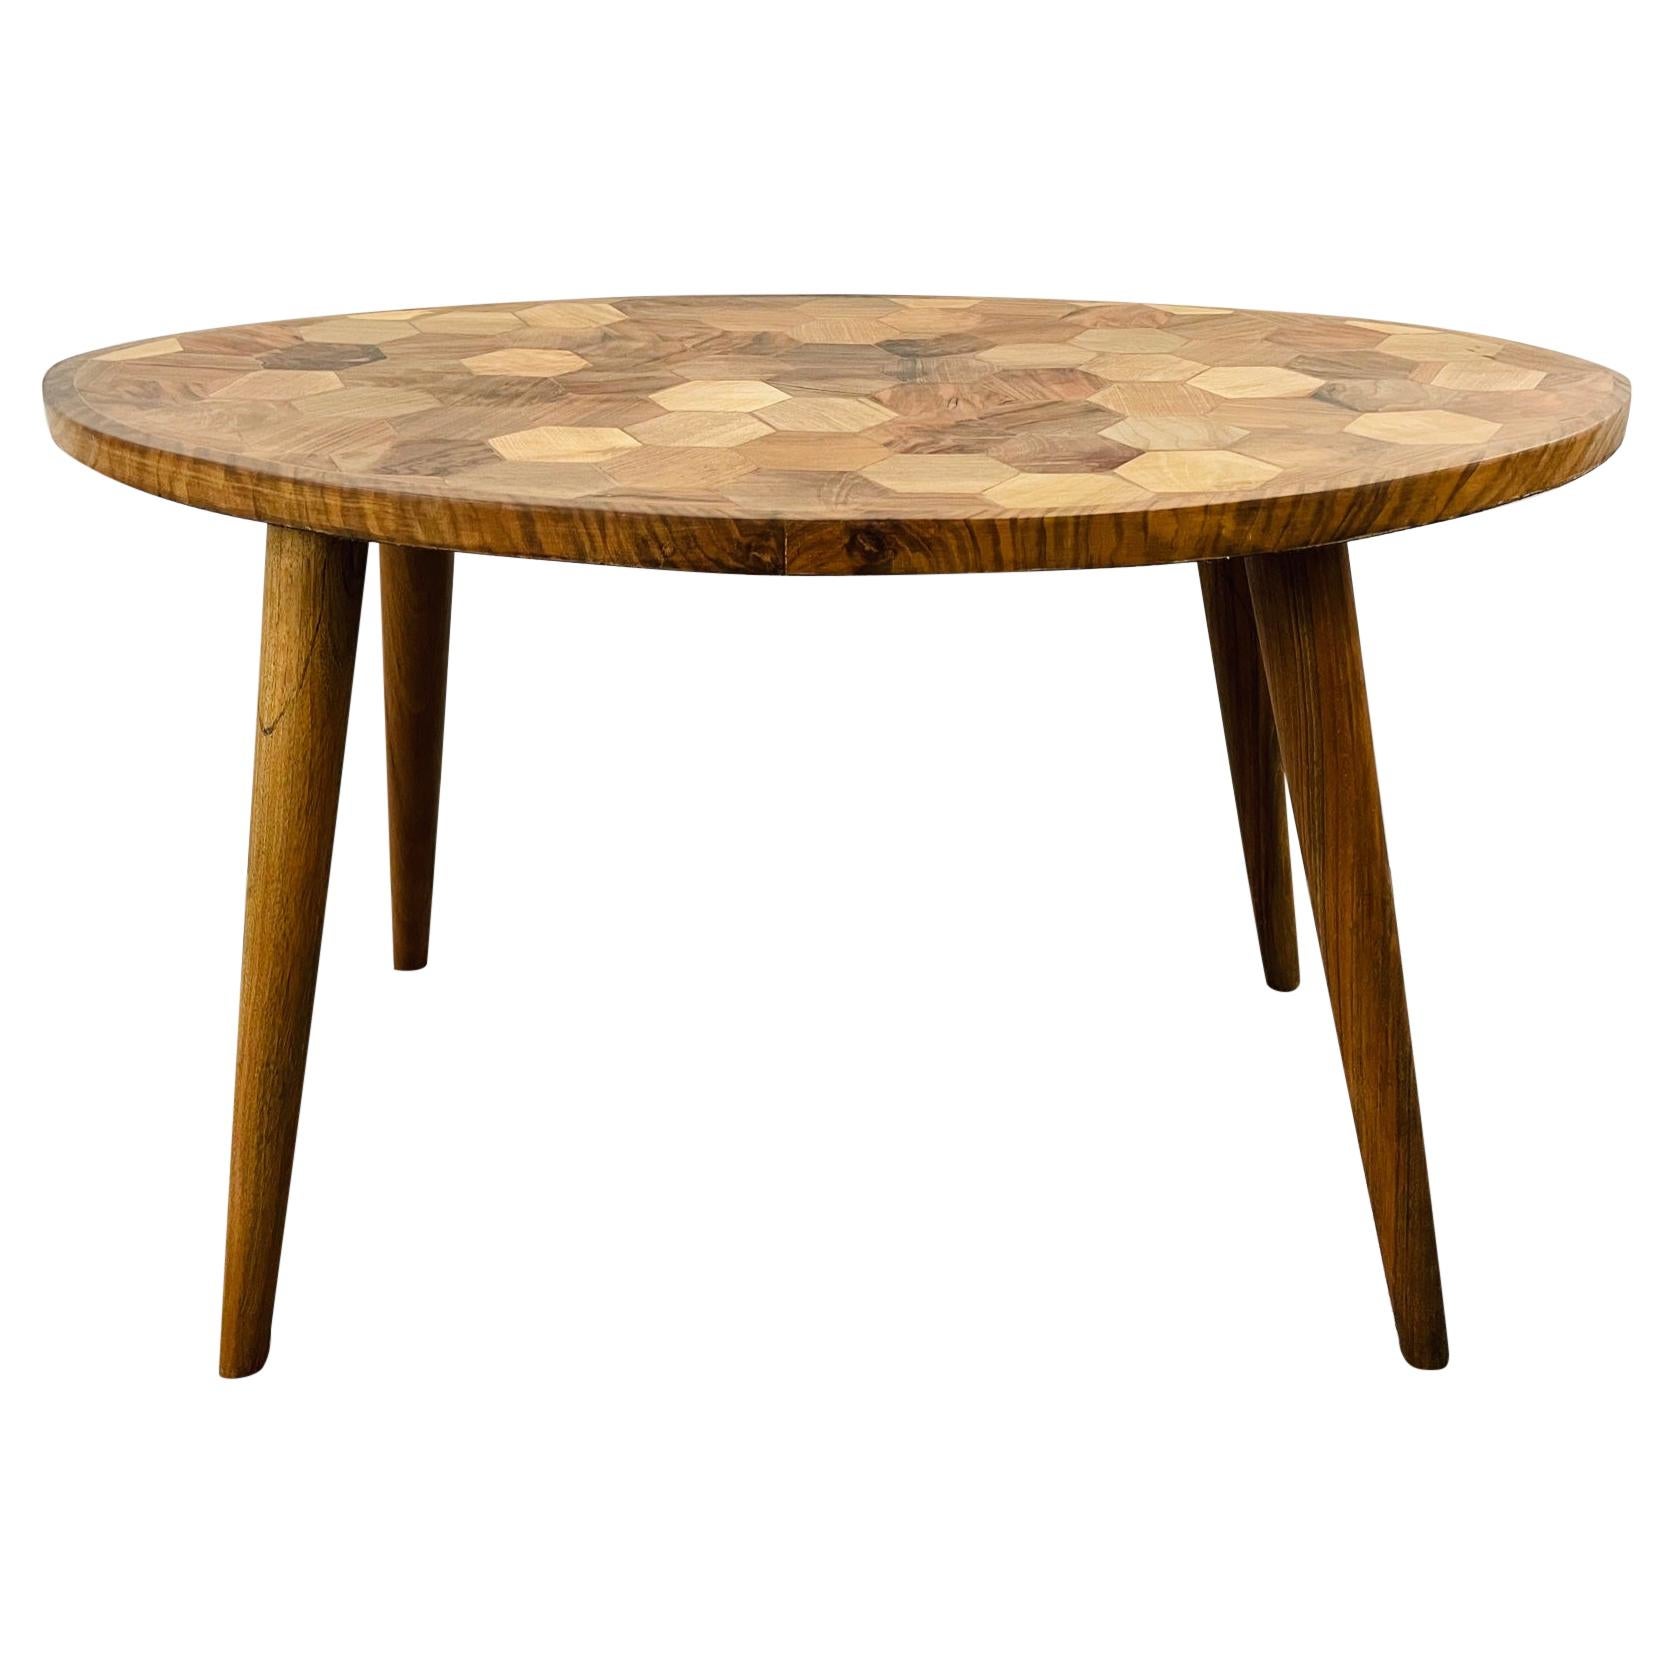 Mid-Century Modern Style Wooden Coffee Table